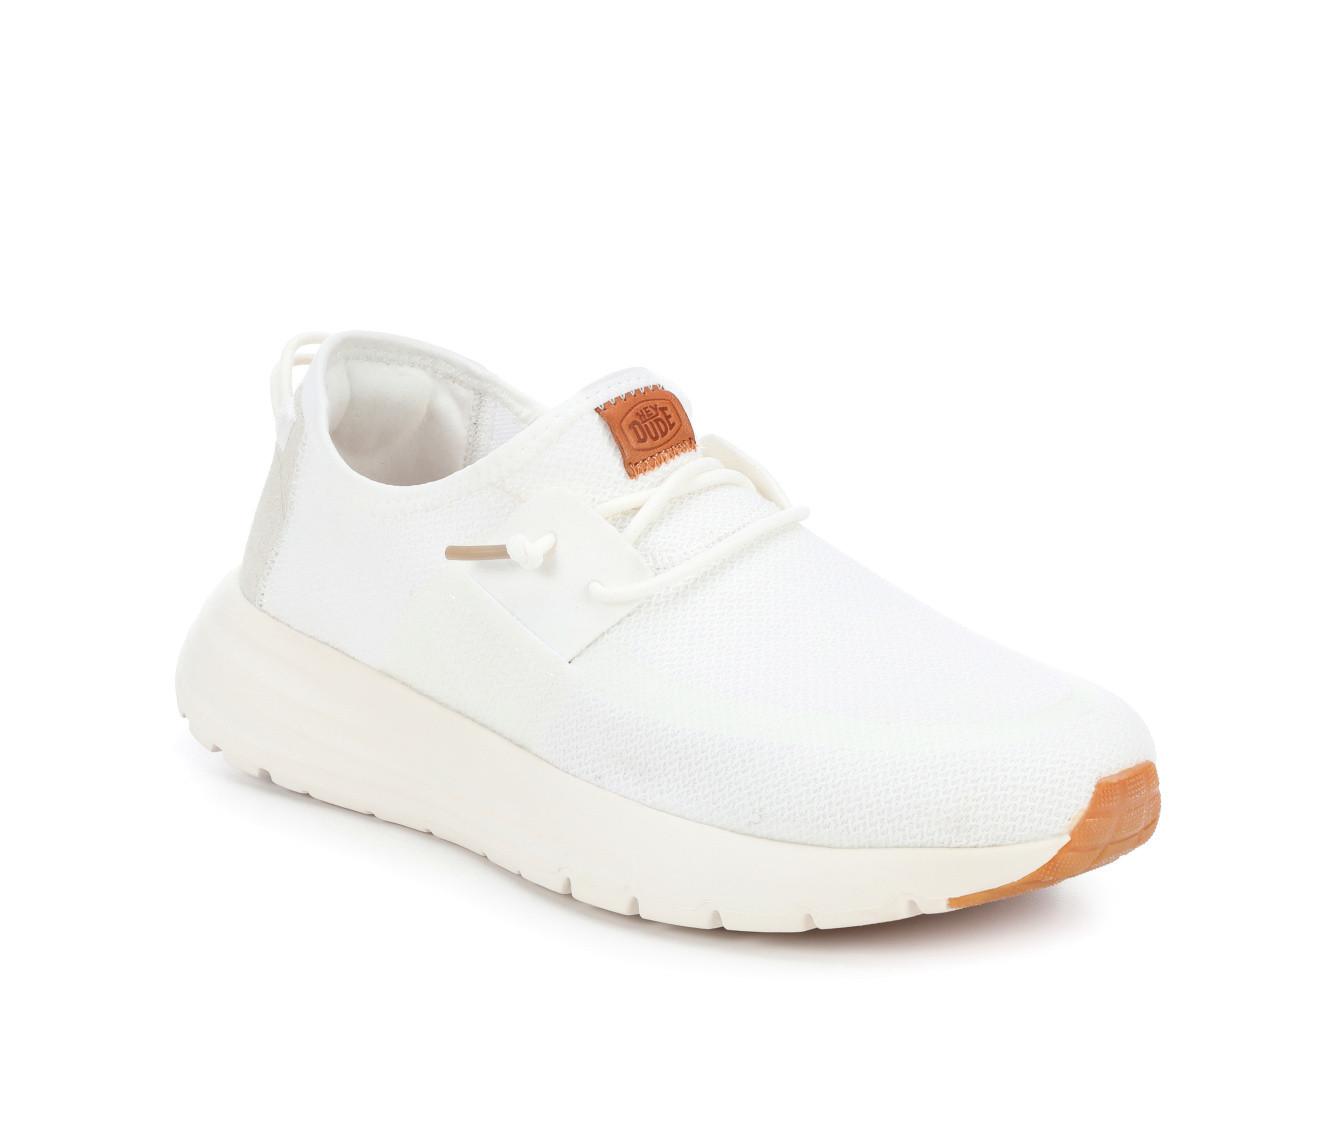 Men's HEYDUDE Sirocco Neutrals-M Casual Shoes